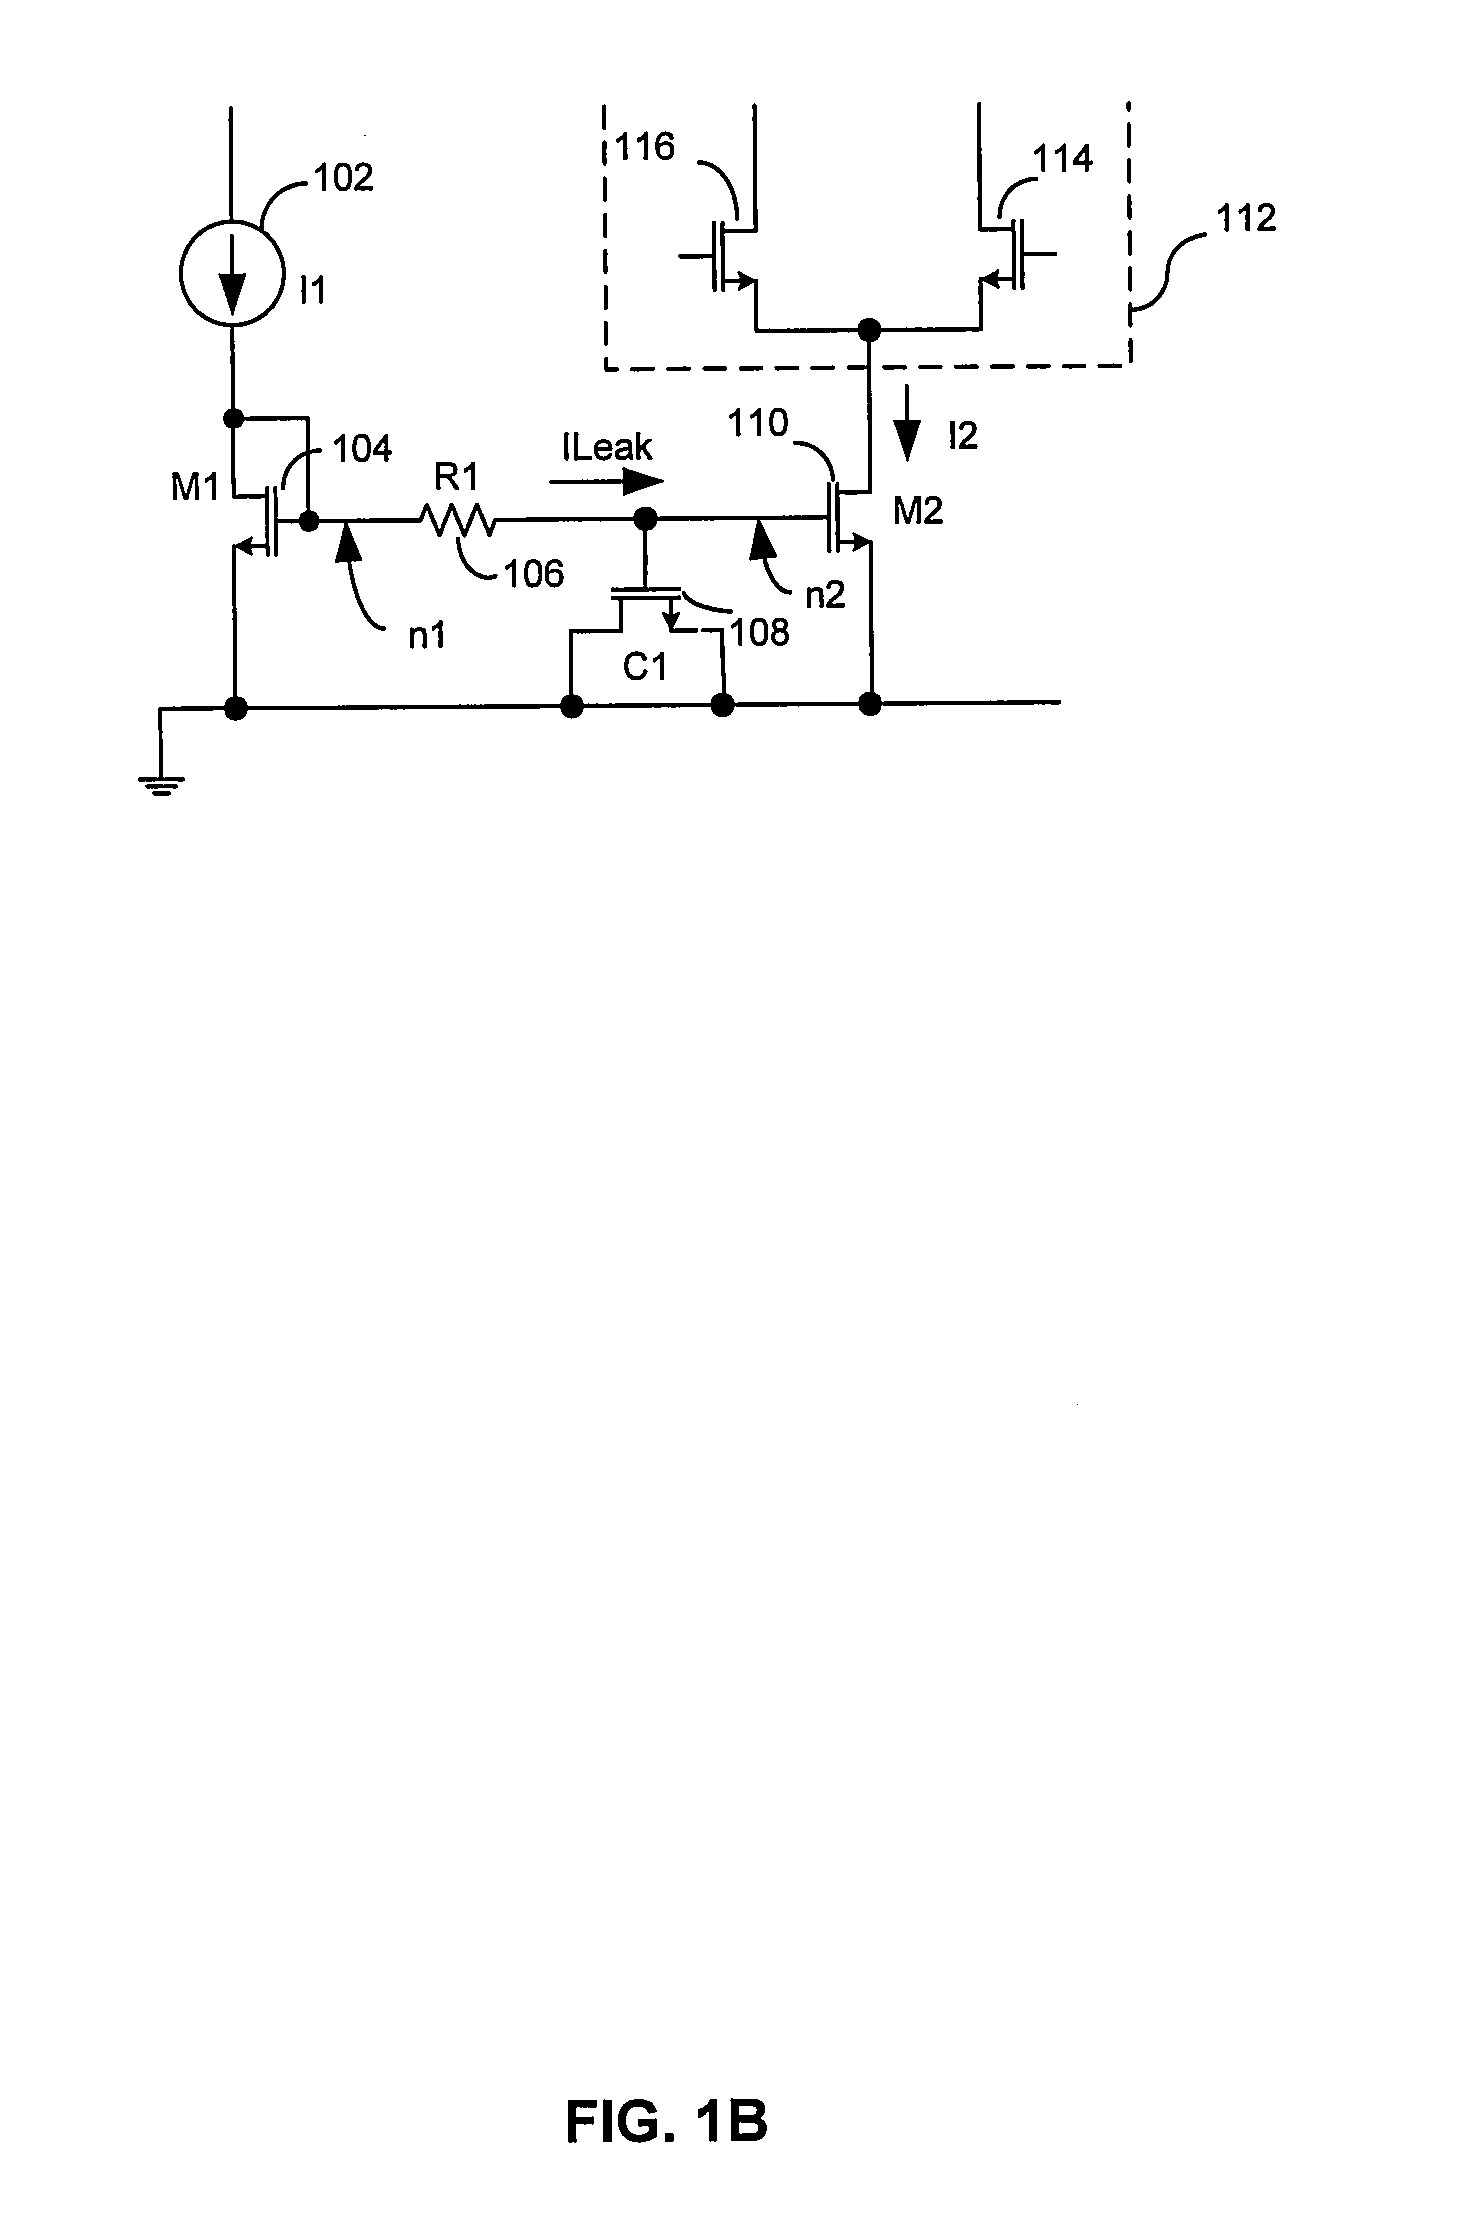 Method and System for Precise Current Matching in Deep Sub-Micron Technology